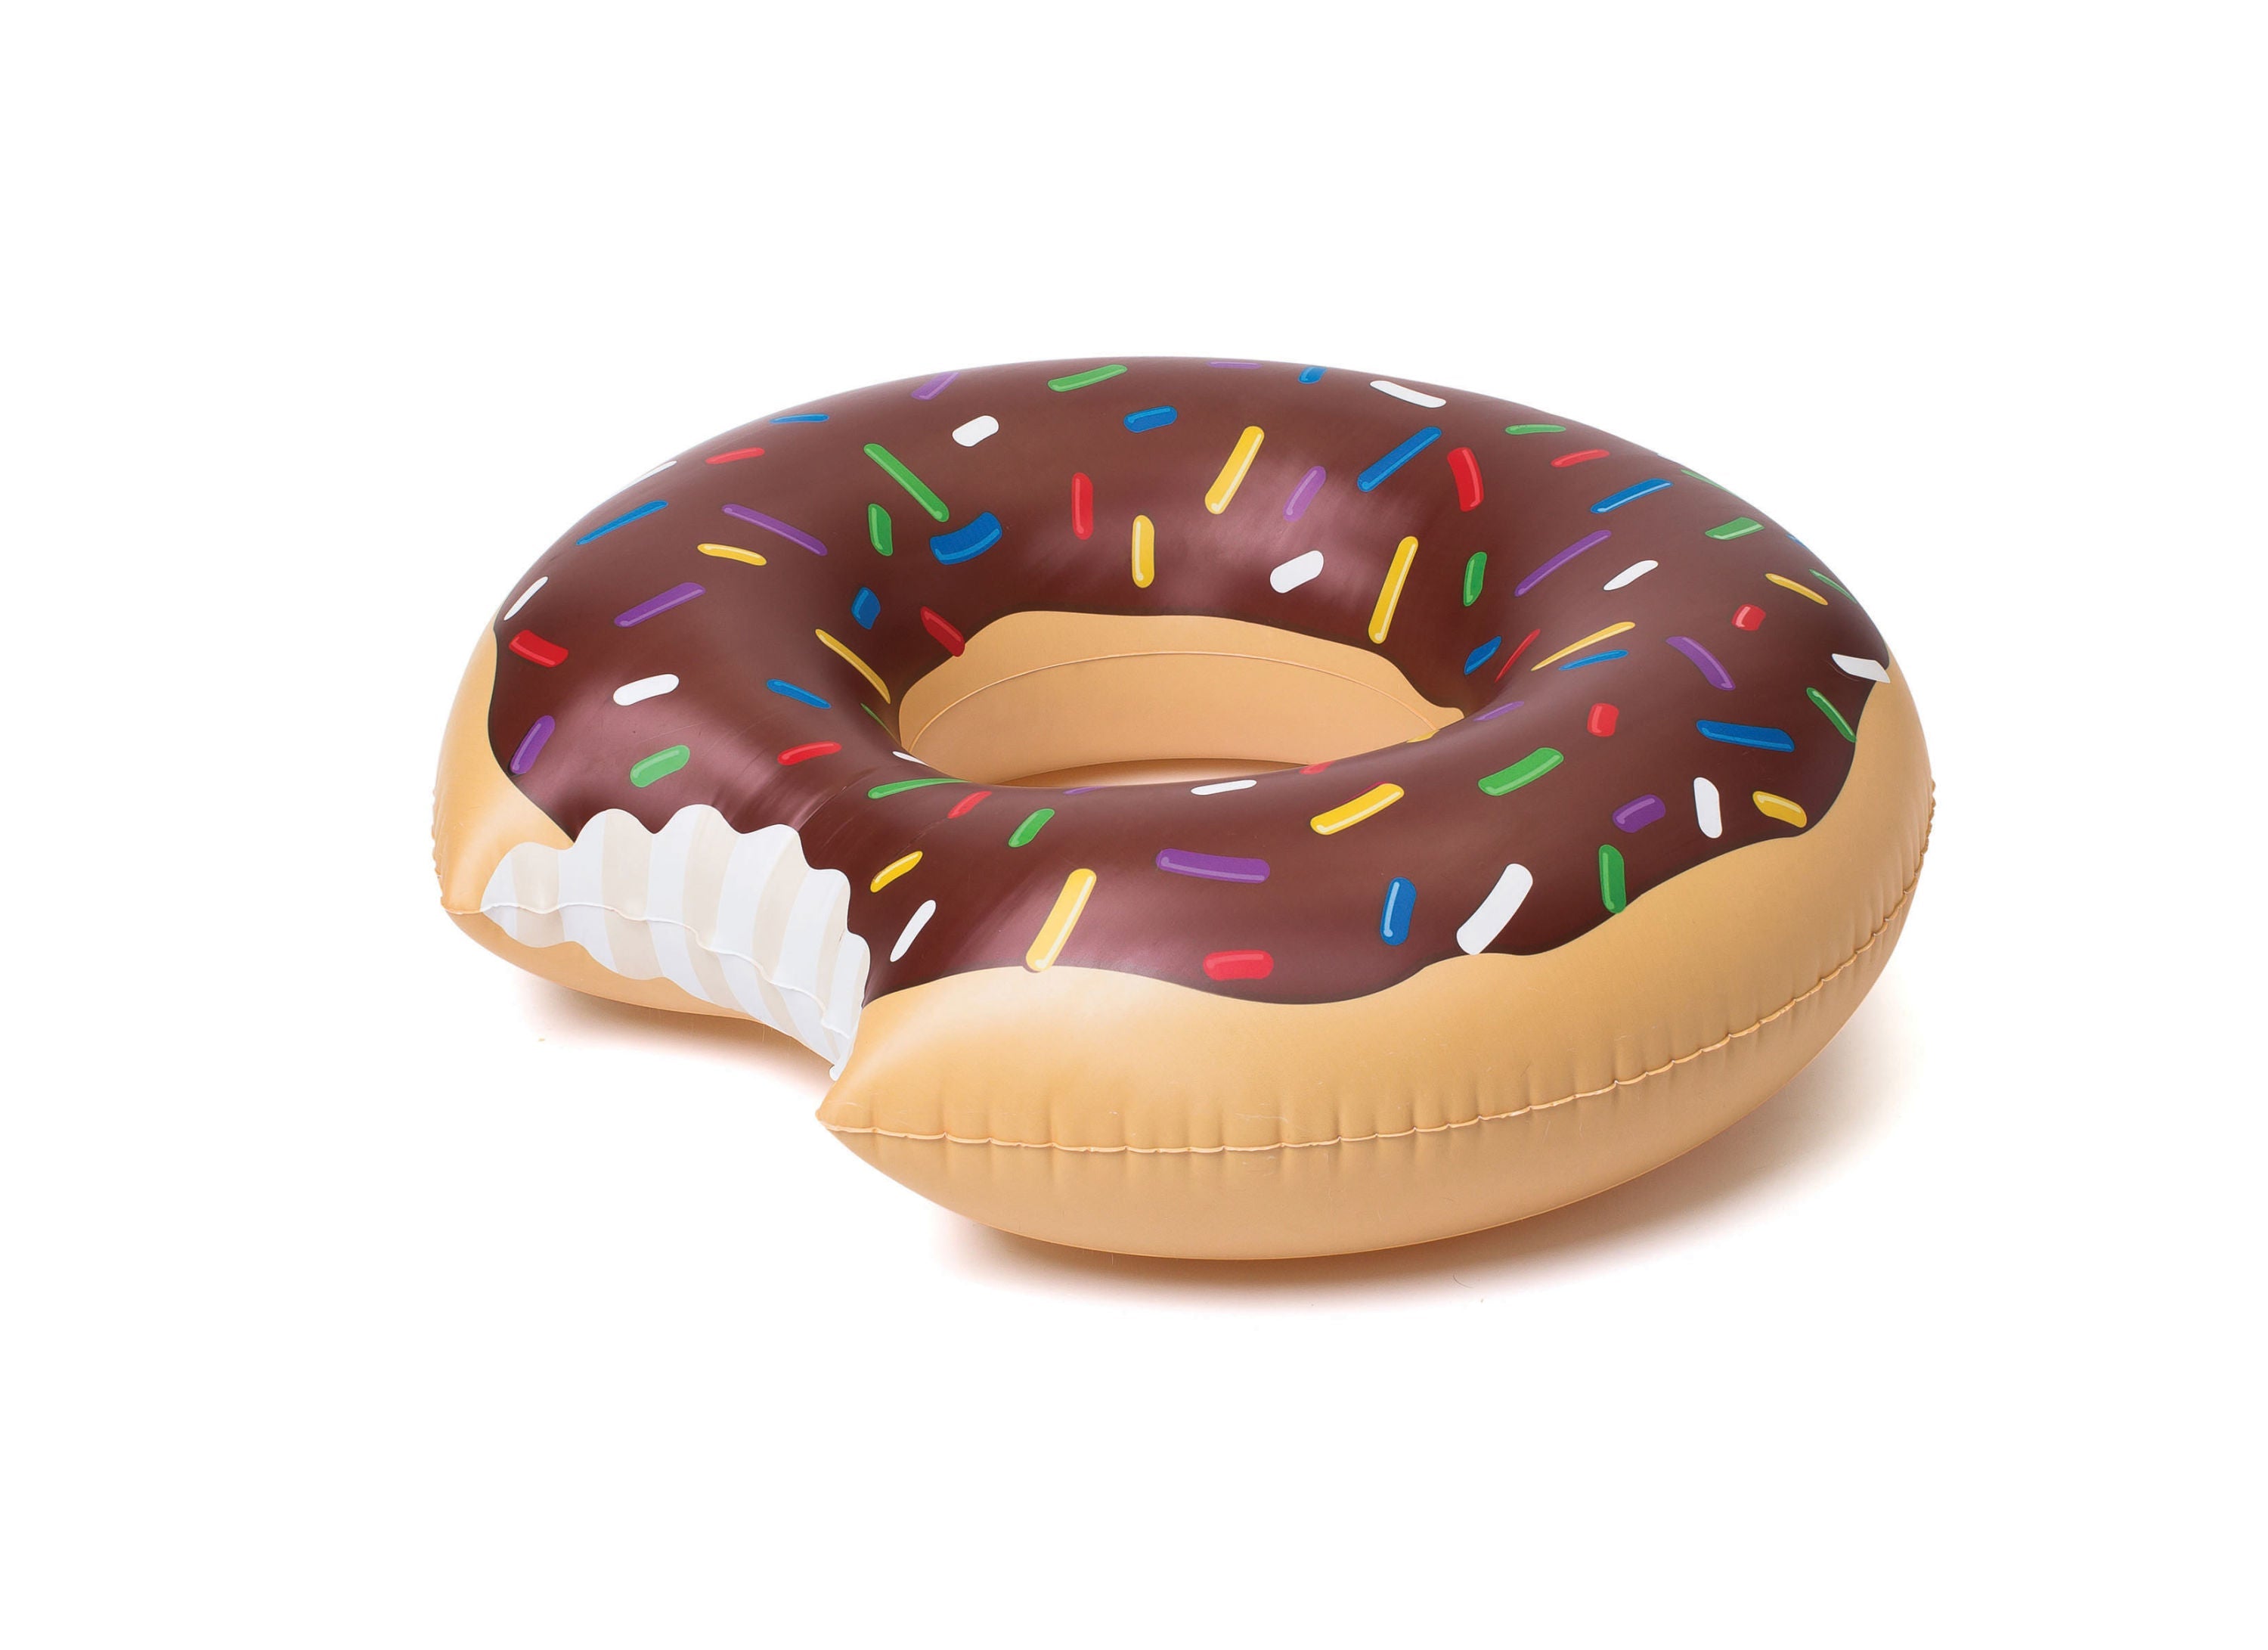 Giant Chocolate Frosted Donut Pool Float